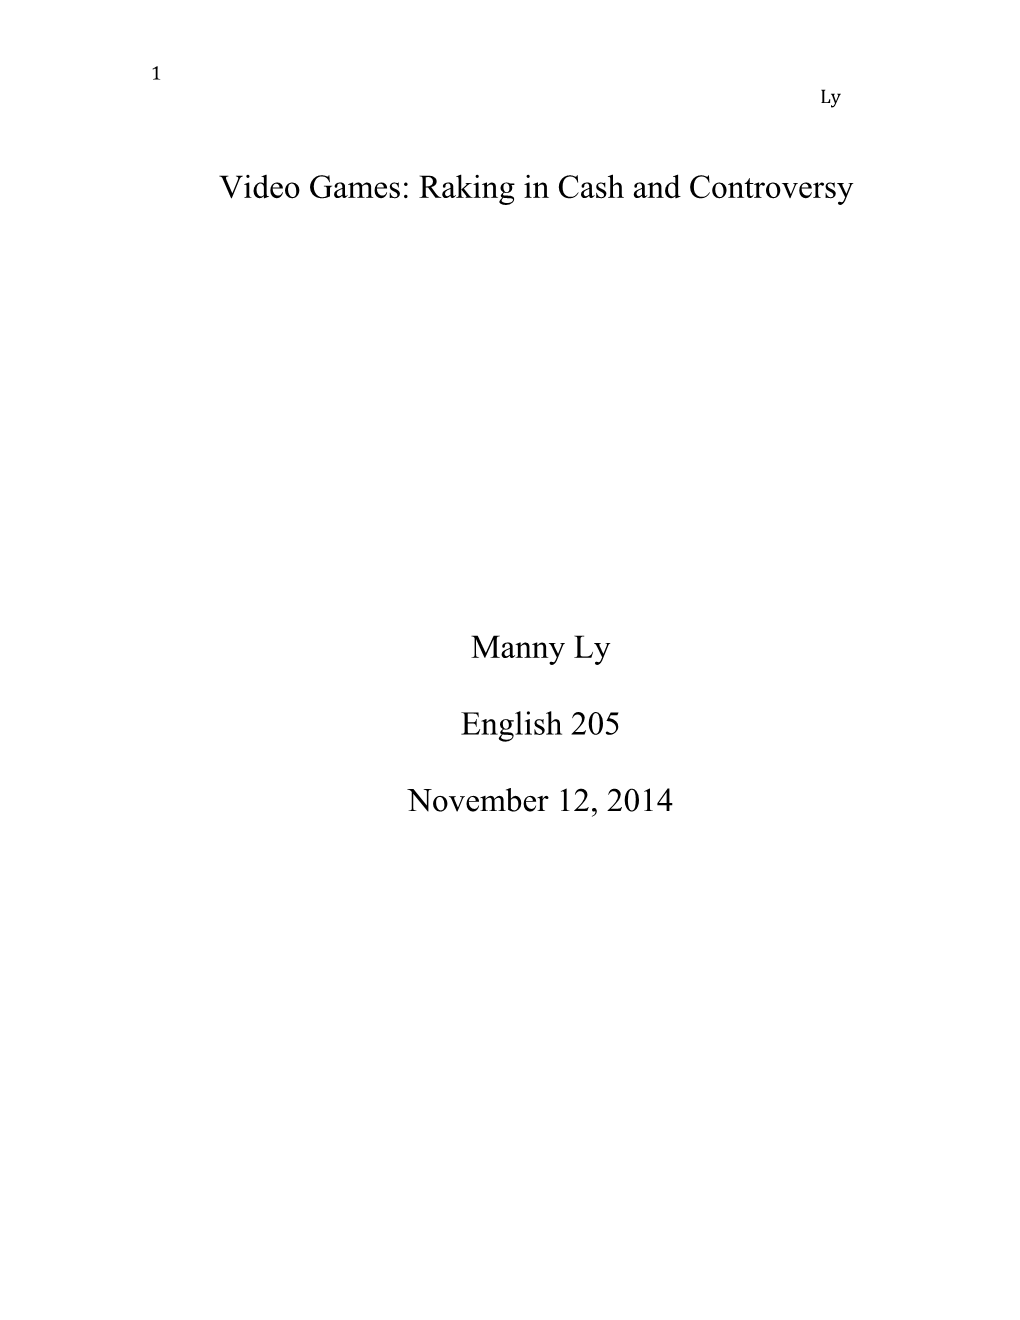 Video Games: Raking in Cash and Controversy